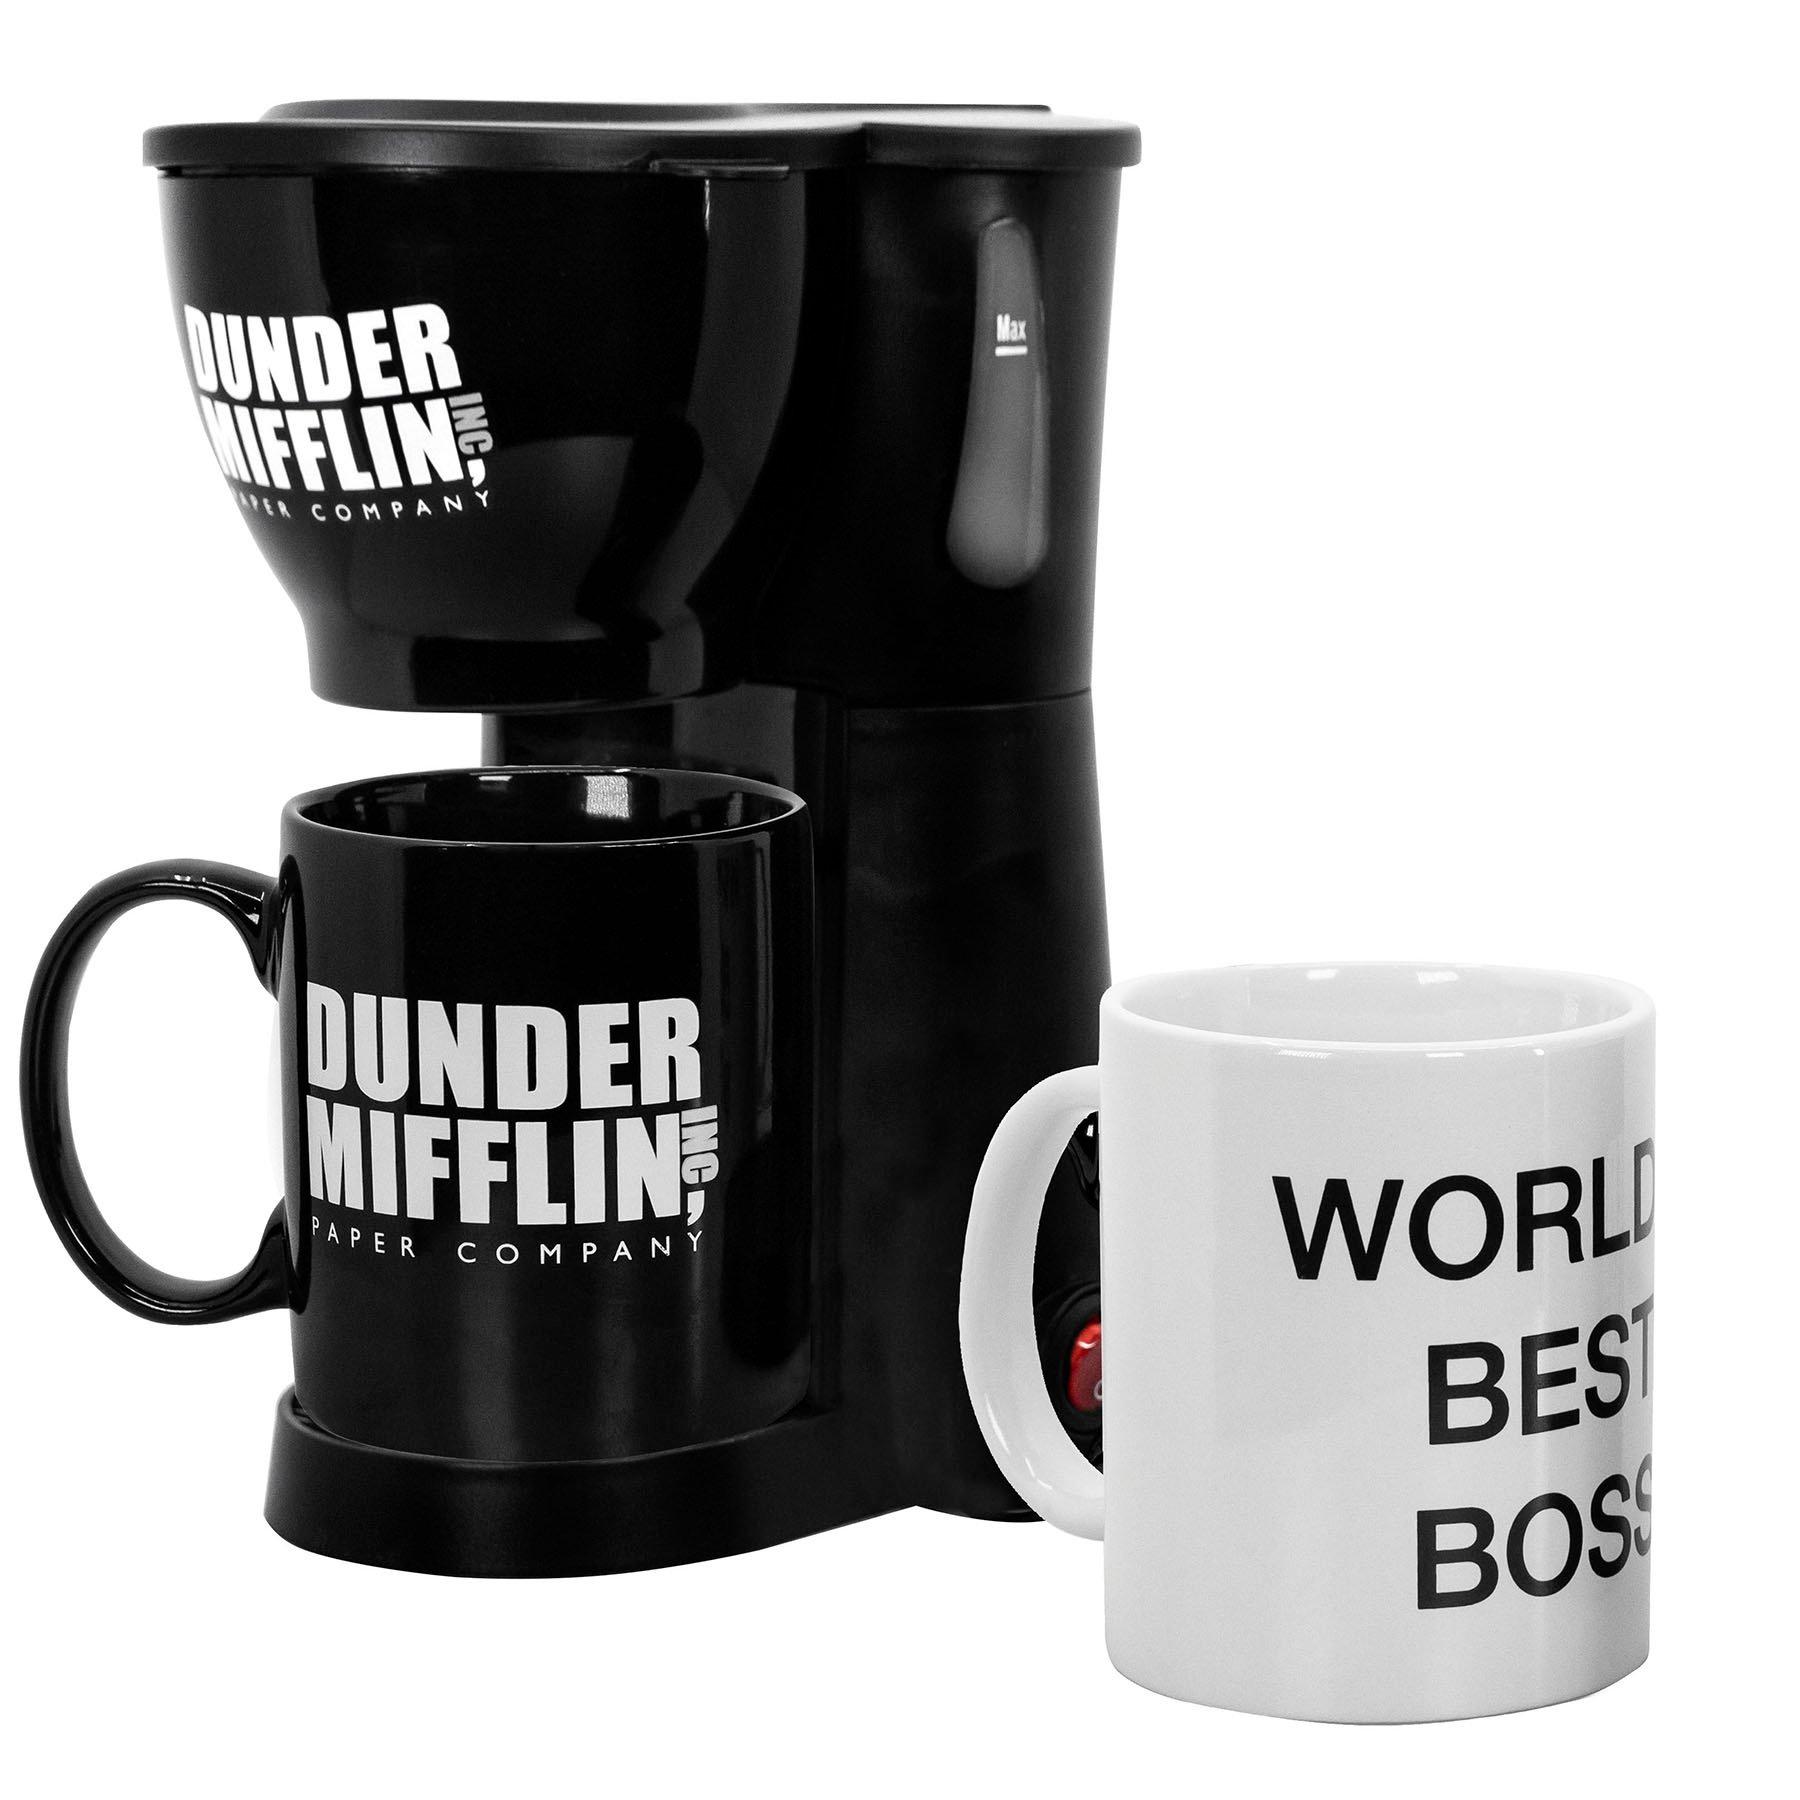 https://media.gamestop.com/i/gamestop/20005582_ALT01/The-Office-Single-Cup-Coffee-Maker-Gift-Set-with-2-Mugs?$pdp$